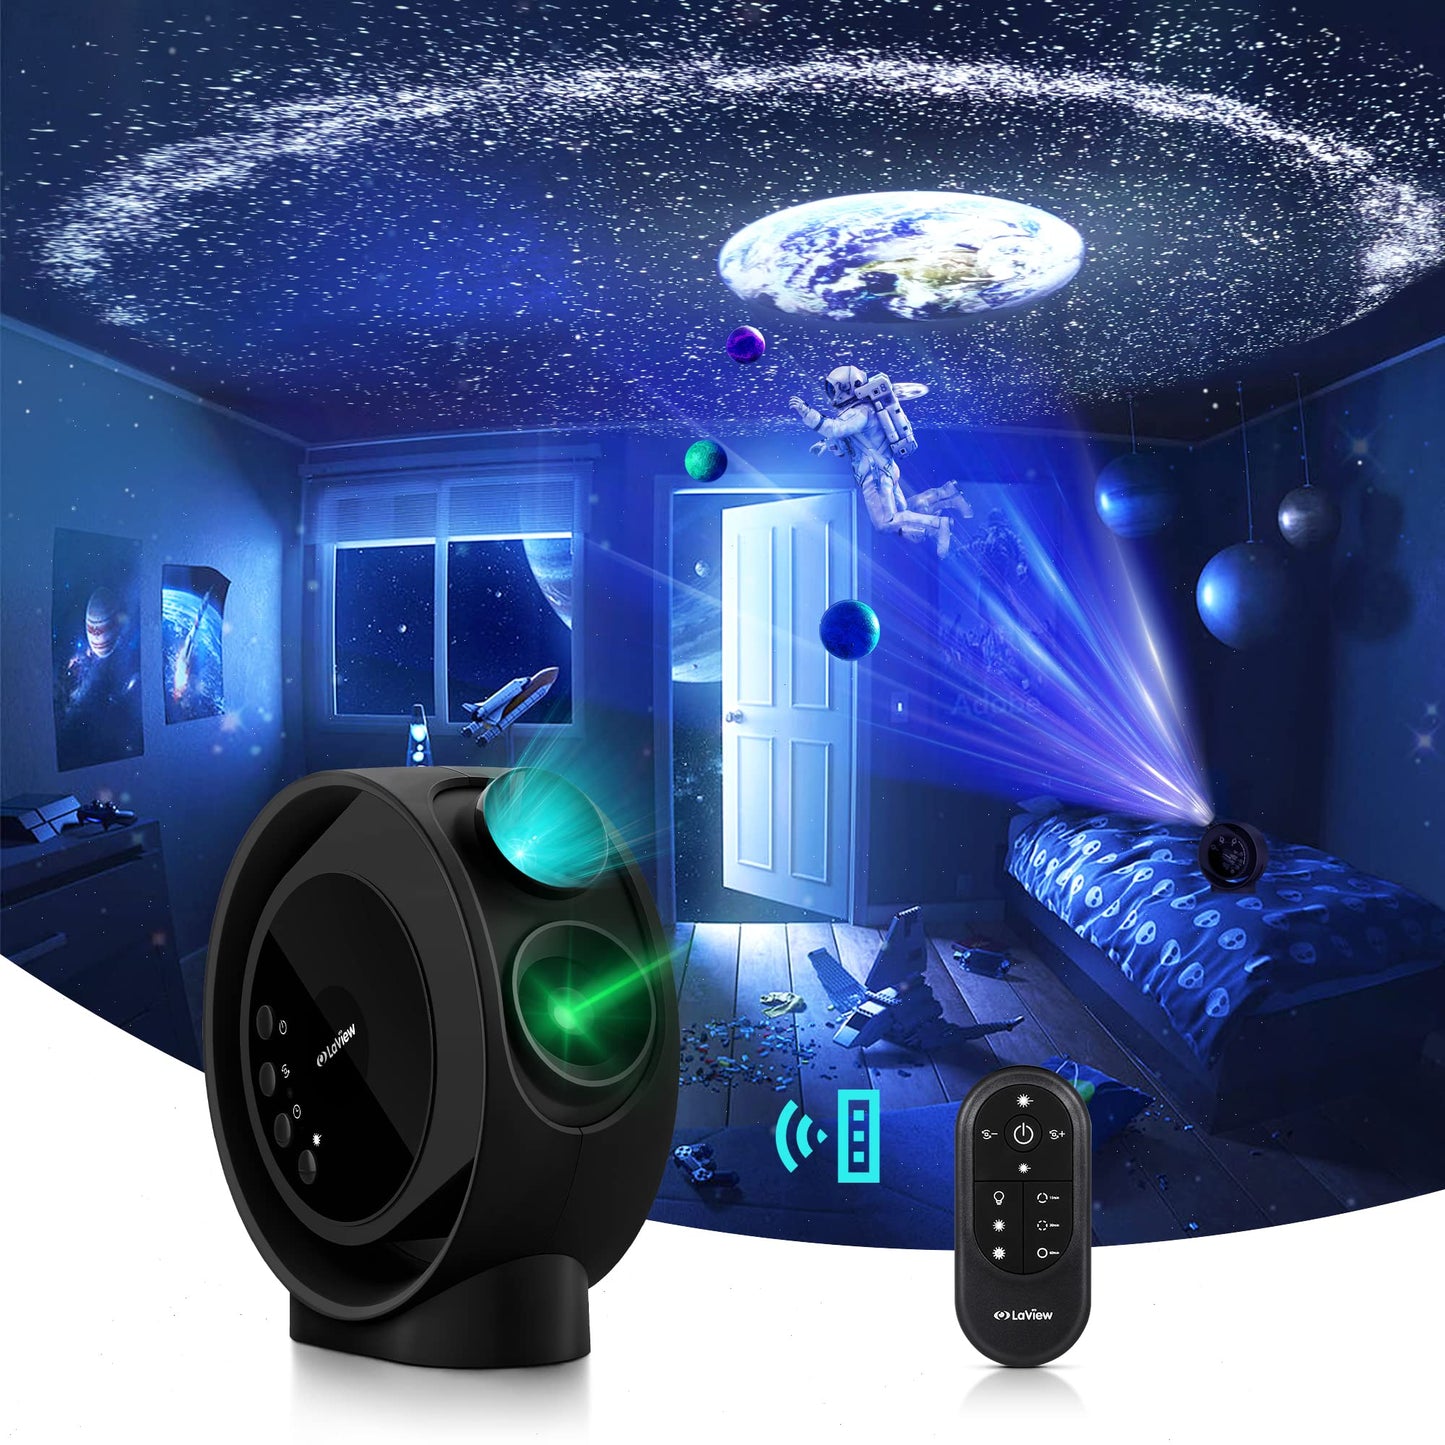 【LaView】Star Projector for Kids HD Image Large Projection Area LED Lights for Bedroom Infrared Remote Controller 3 Level Silent Rotation Night Light,Include 6K Replaceable 4 Galaxy Discs